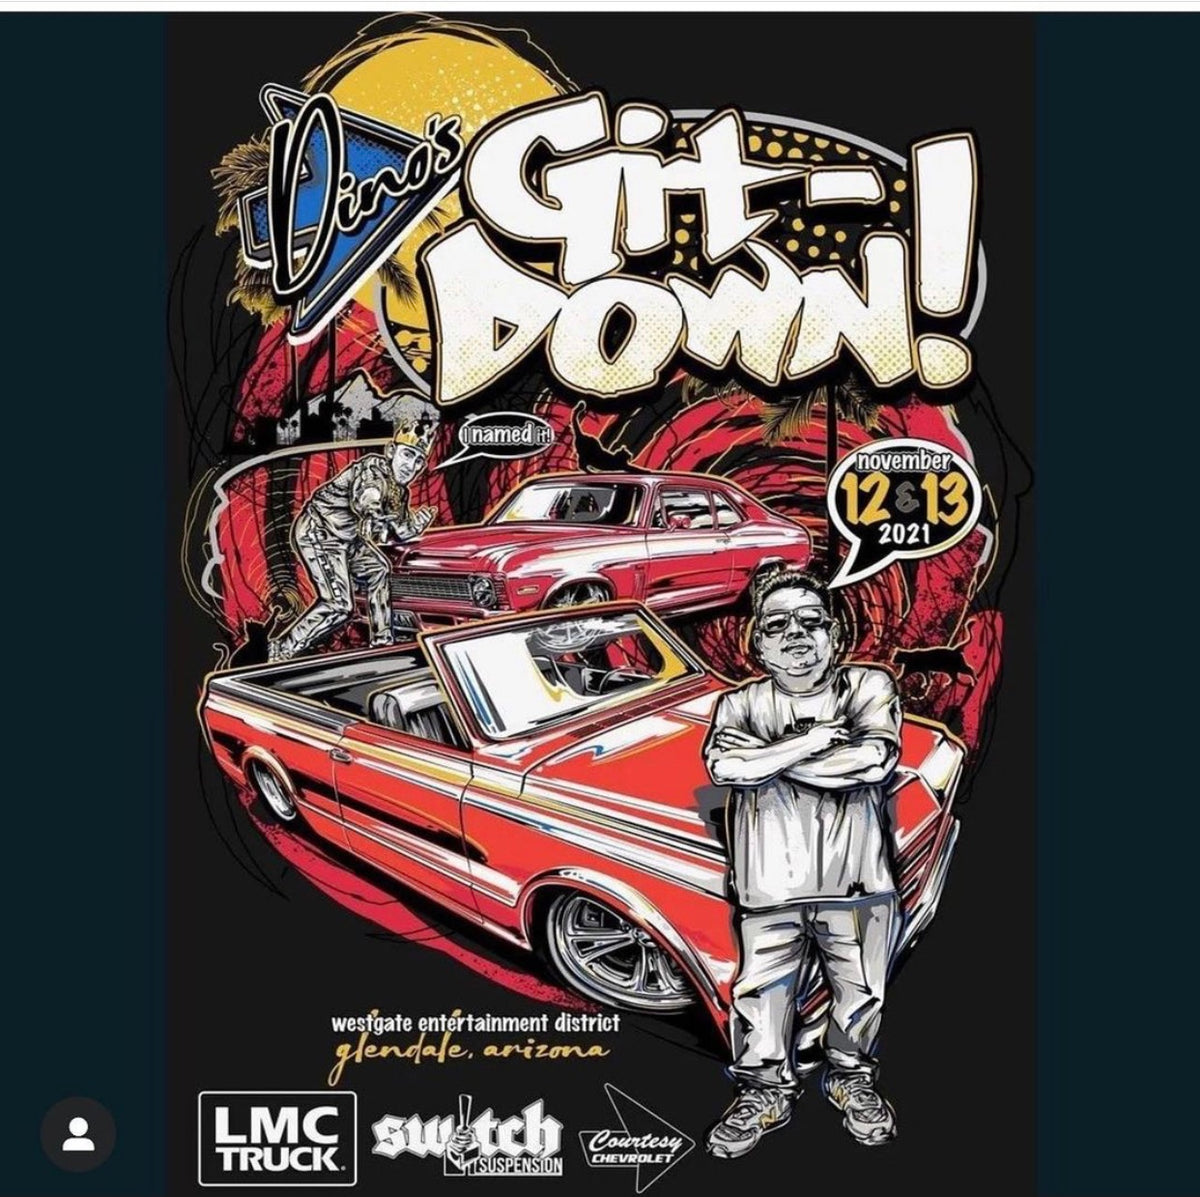 NEXT EVENT 11TH ANNUAL DINO'S GIT DOWN 2021 Dino's Chevy Only